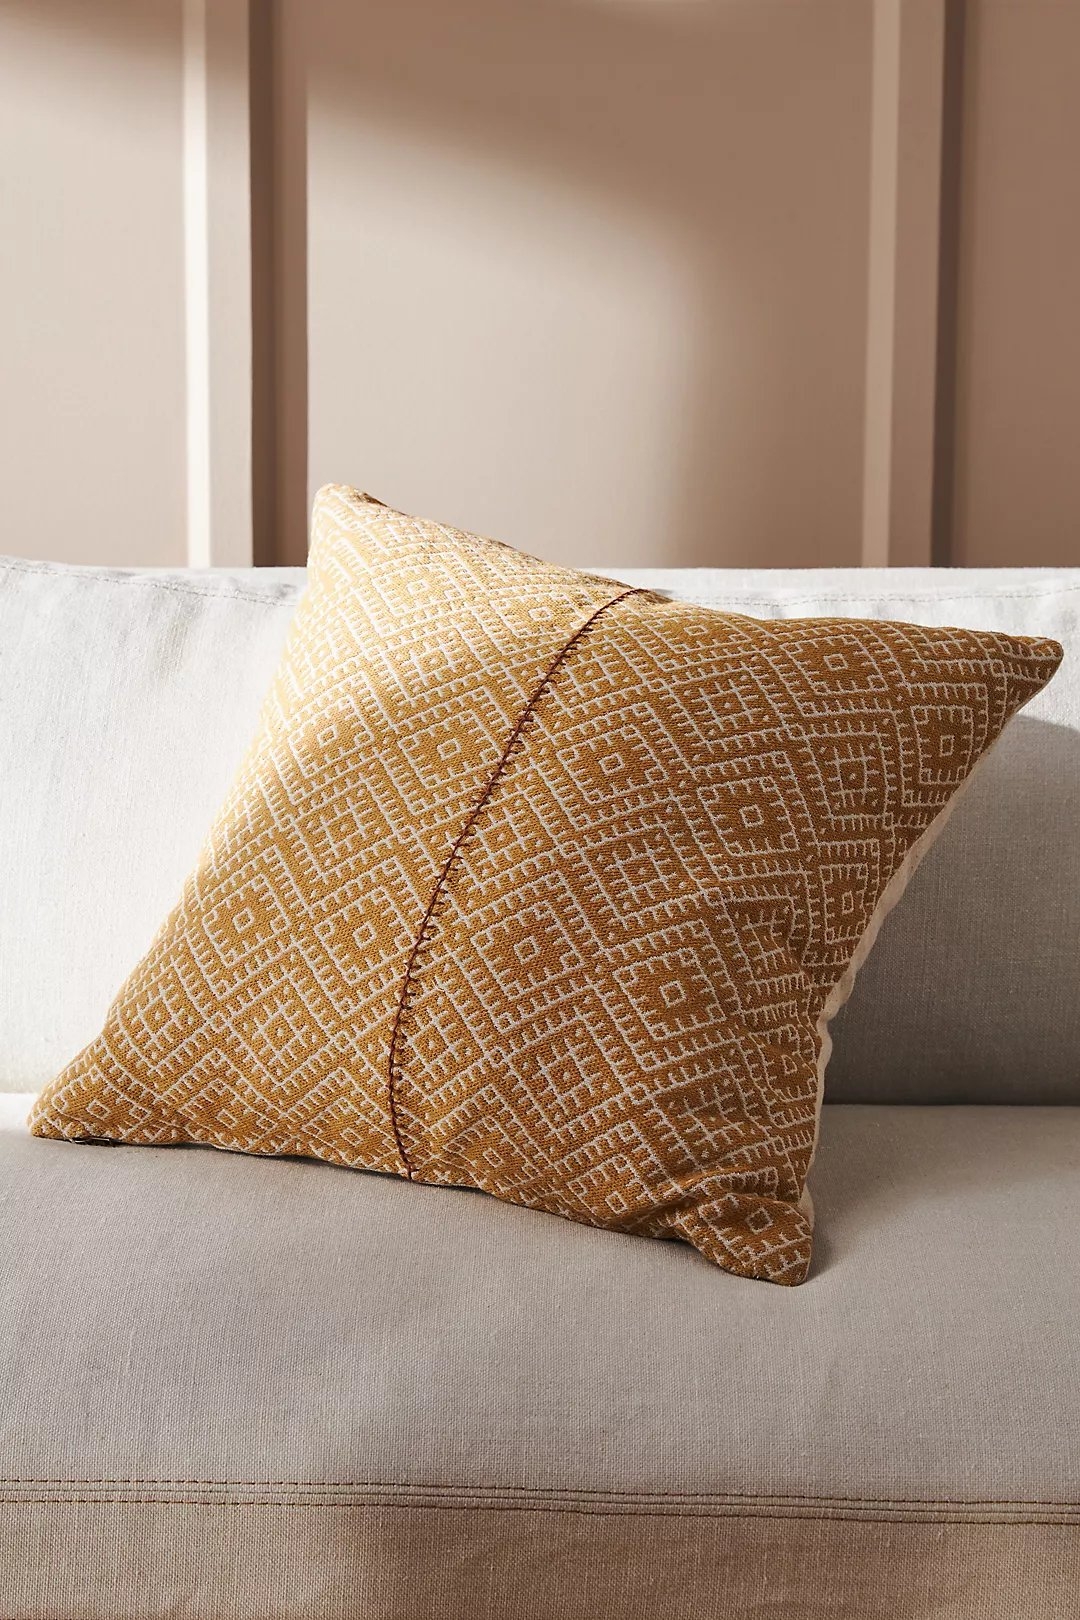 Amber Lewis for Anthropologie Woven Westley Pillow - Image 0